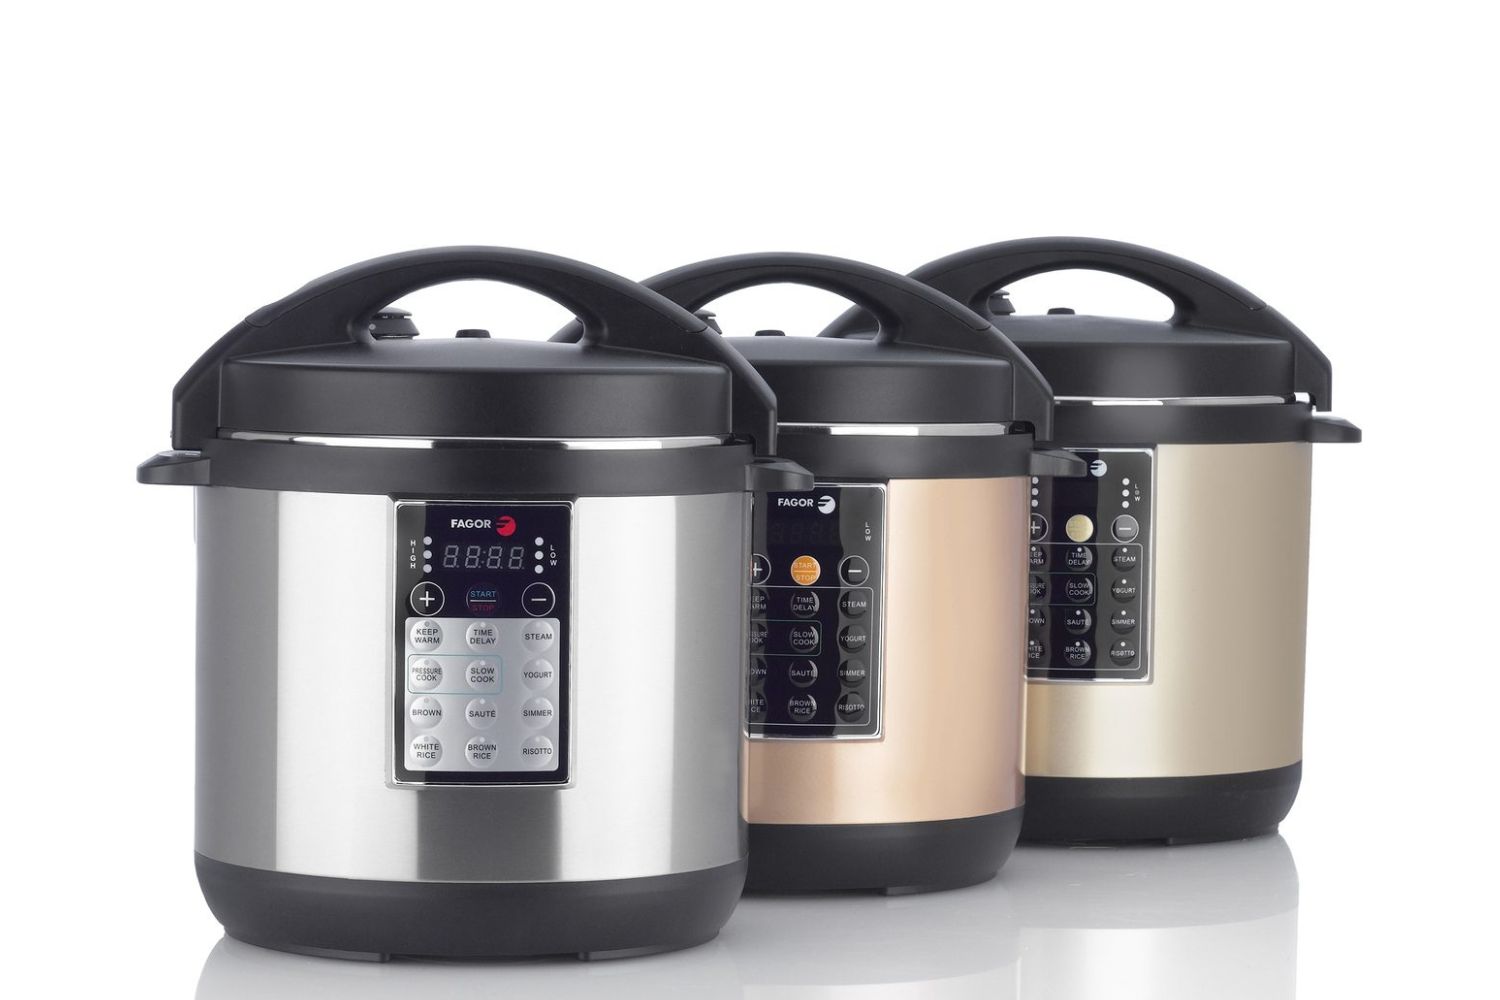 How To Use Fagor Electric Pressure Cooker